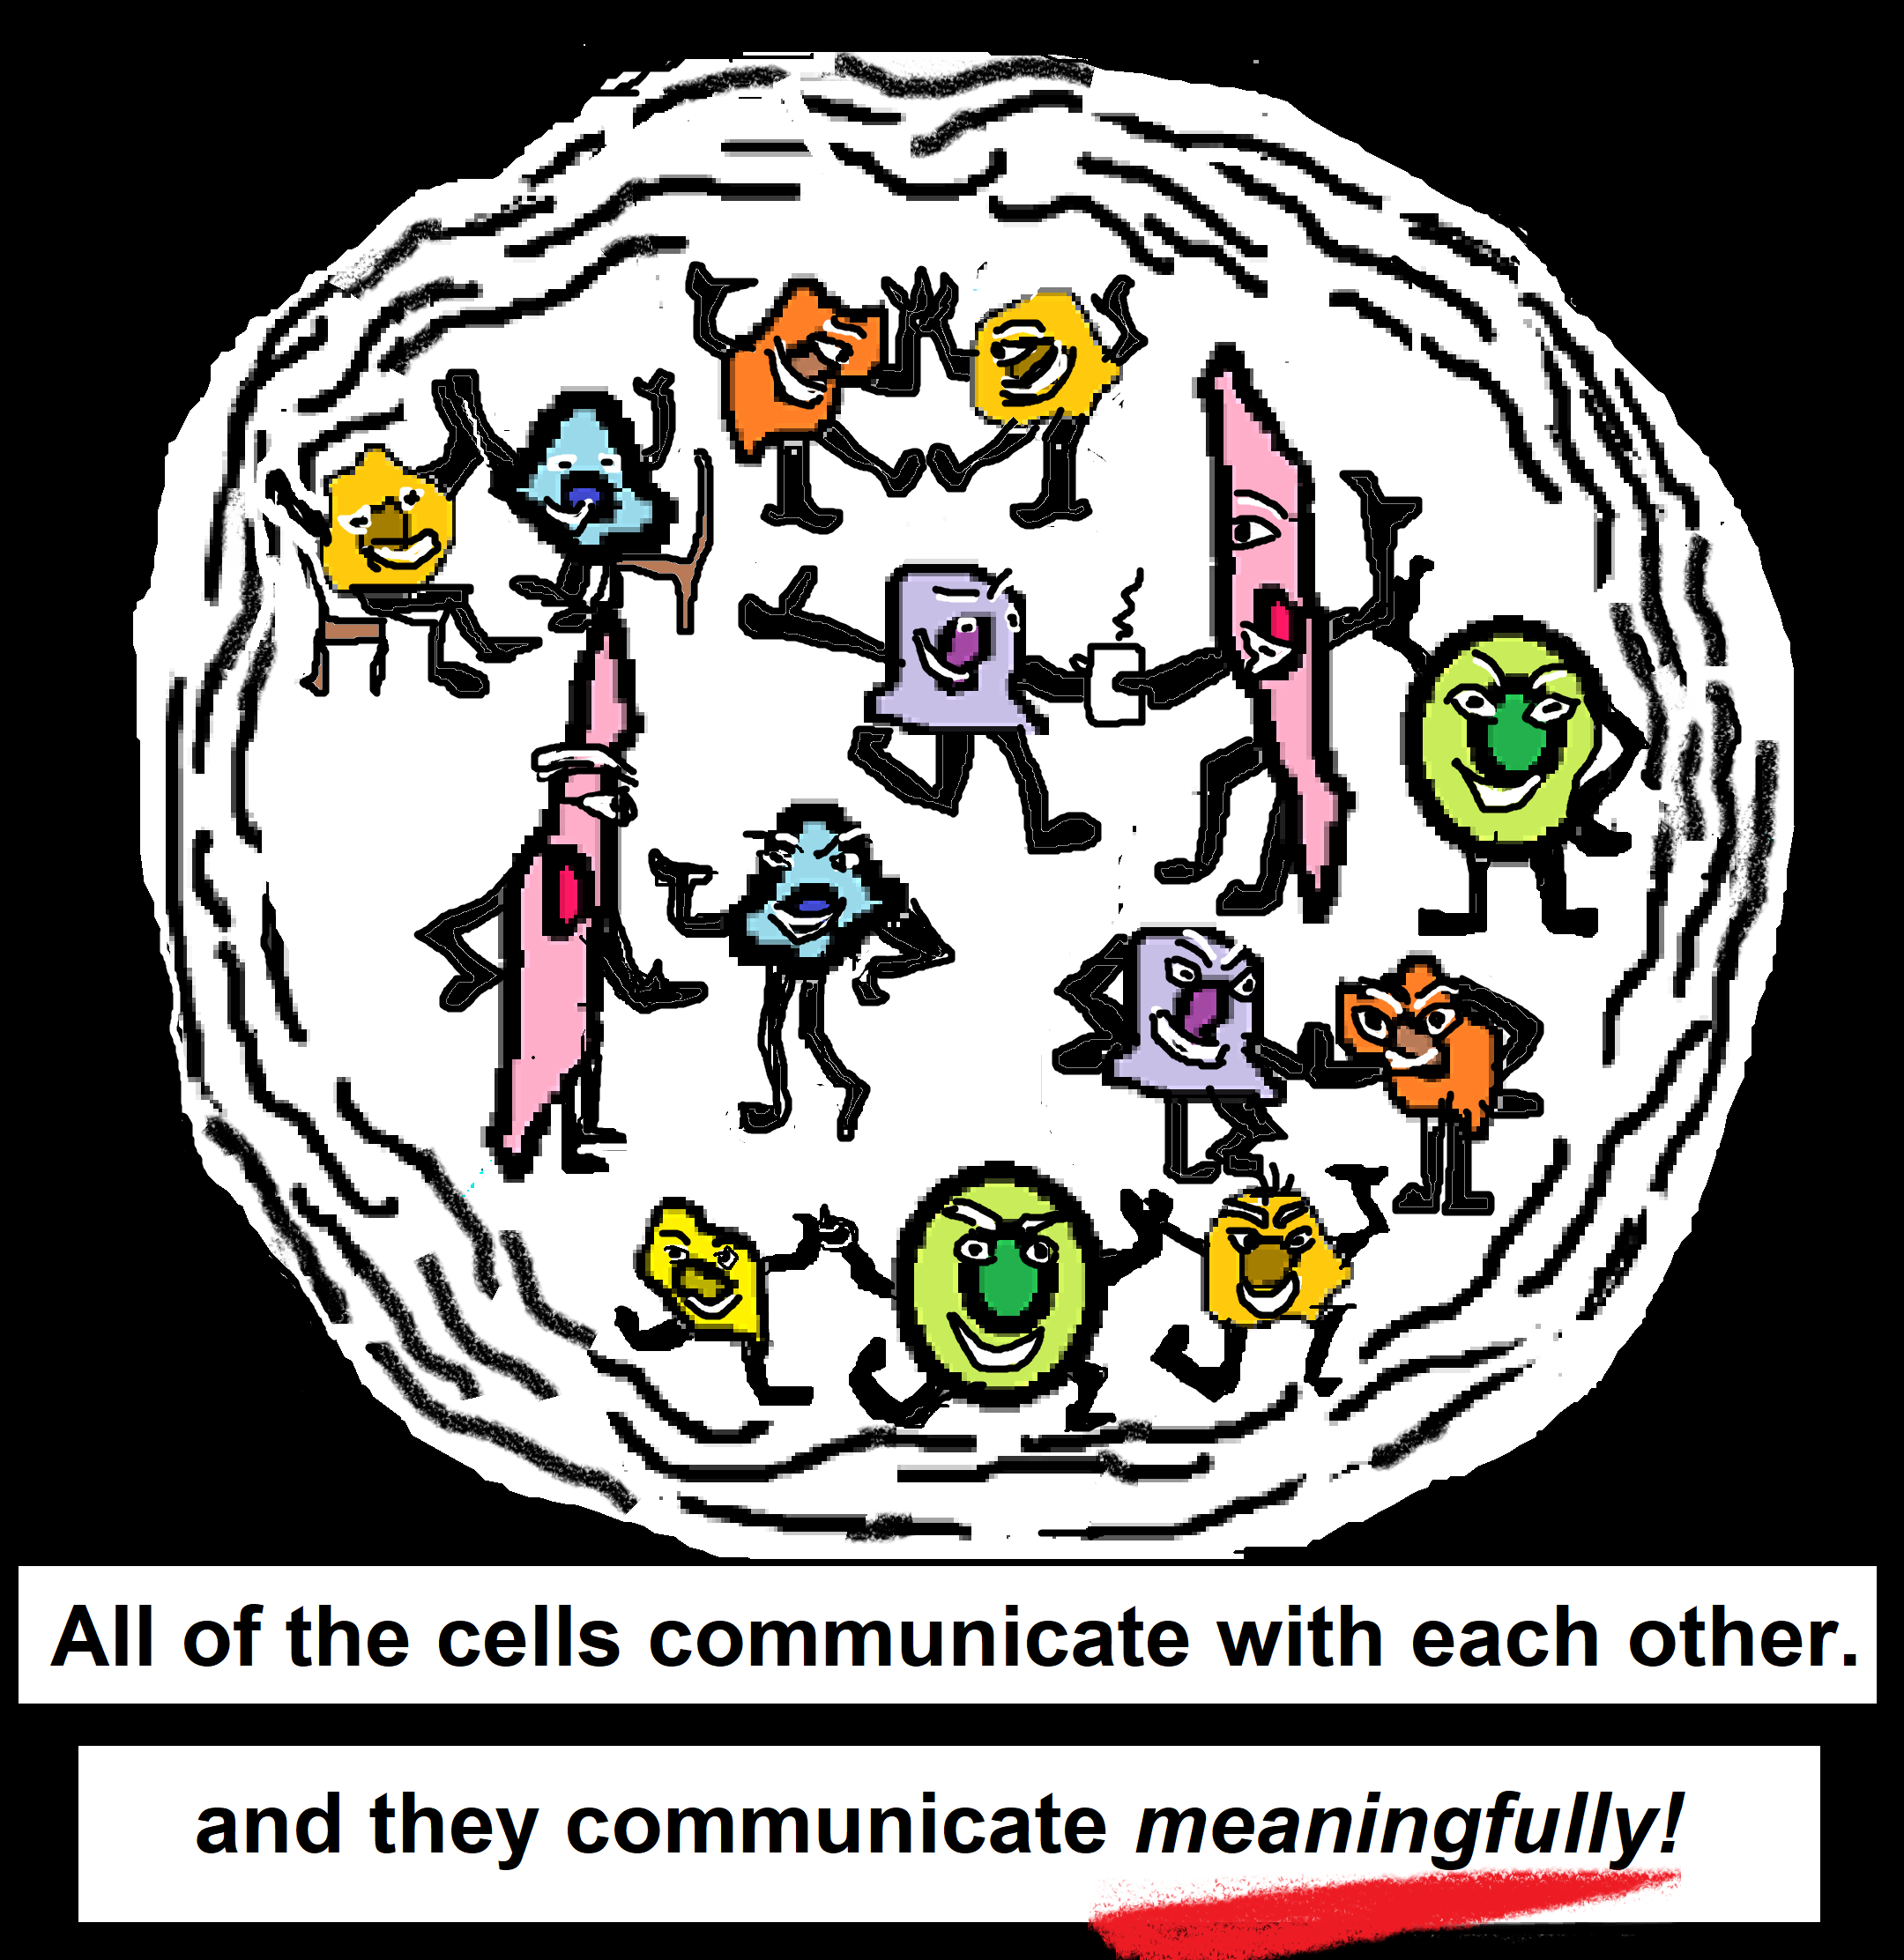 all cells communicate with each other meaningfully